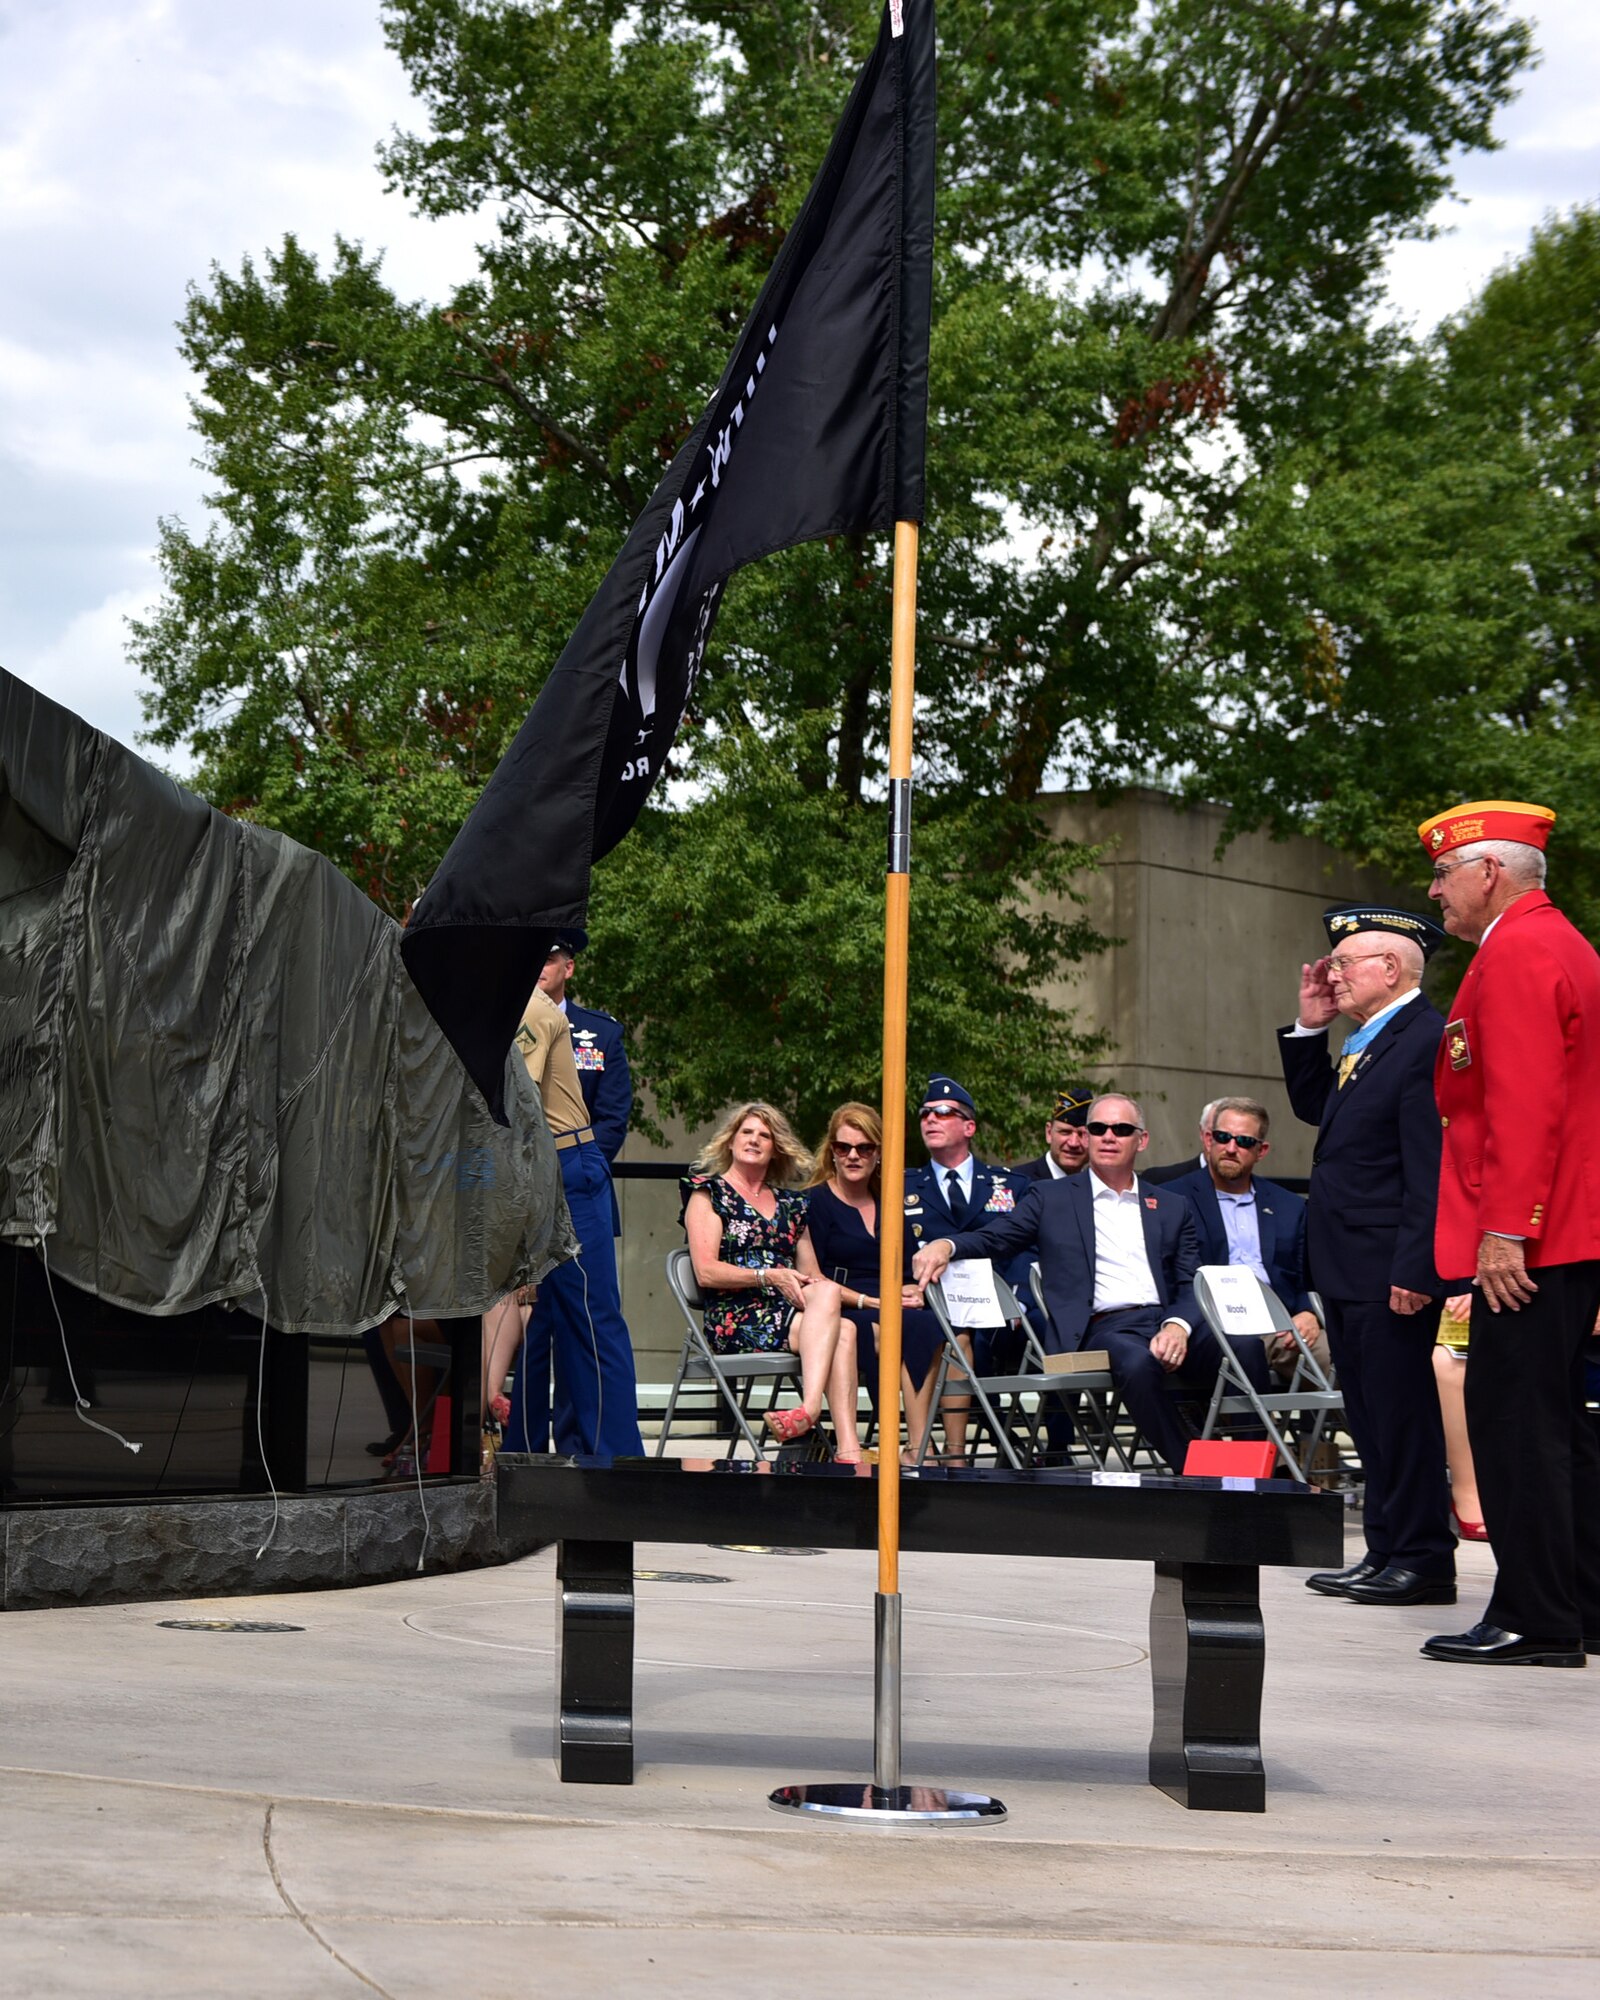 Individuals gather in an outdoor court yard to see a black monument